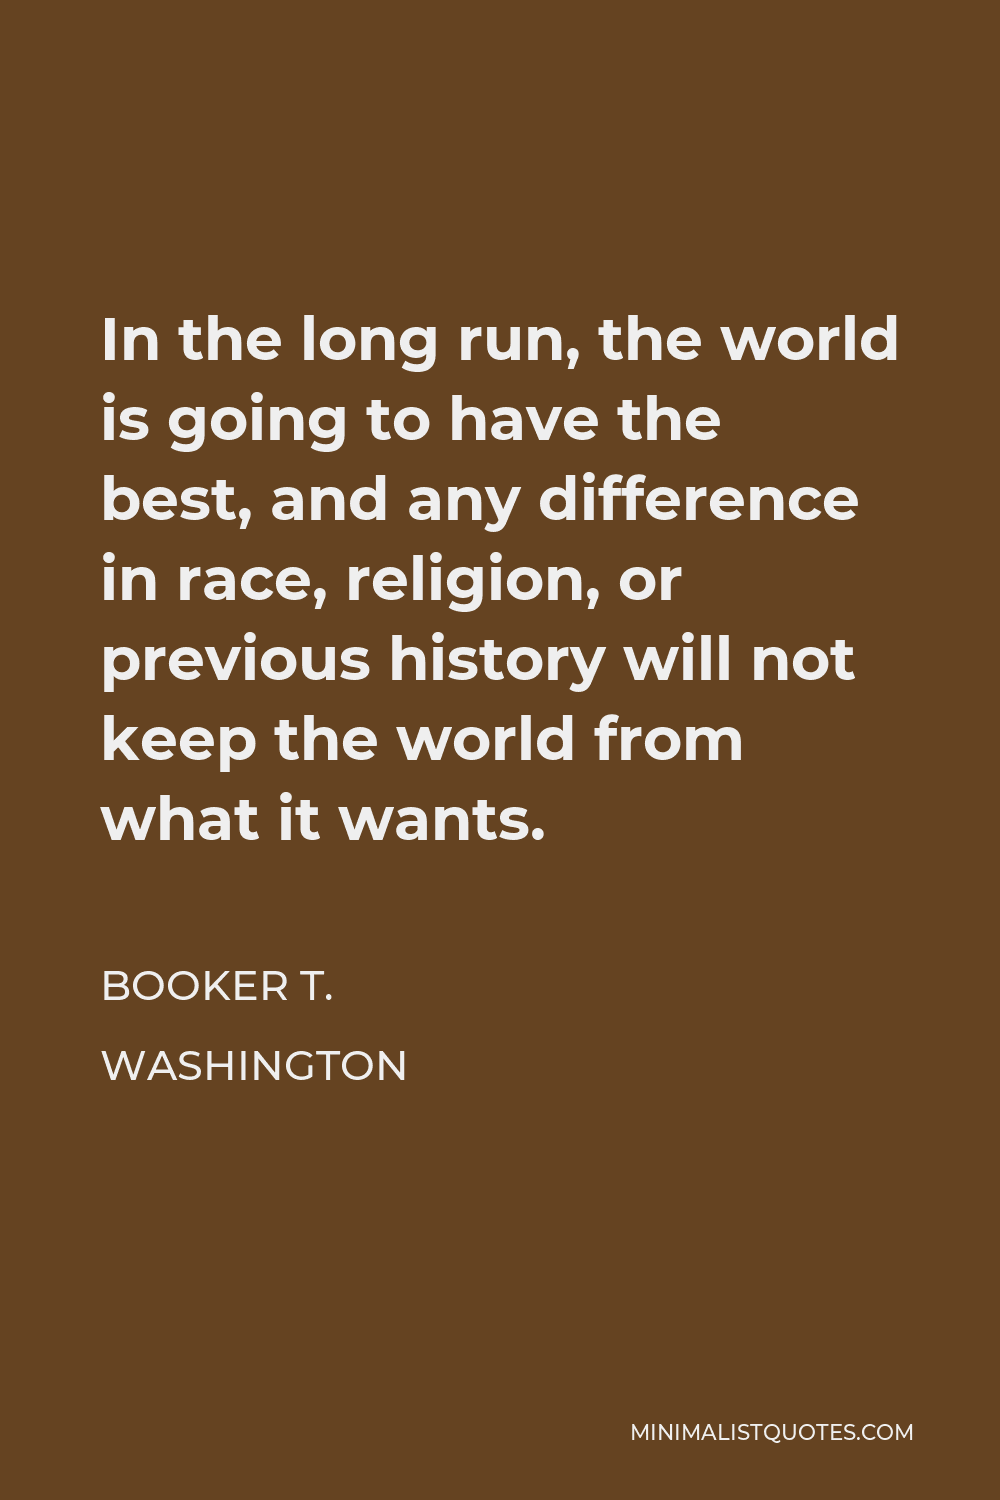 Booker T. Washington Quote - In the long run, the world is going to have the best, and any difference in race, religion, or previous history will not keep the world from what it wants.